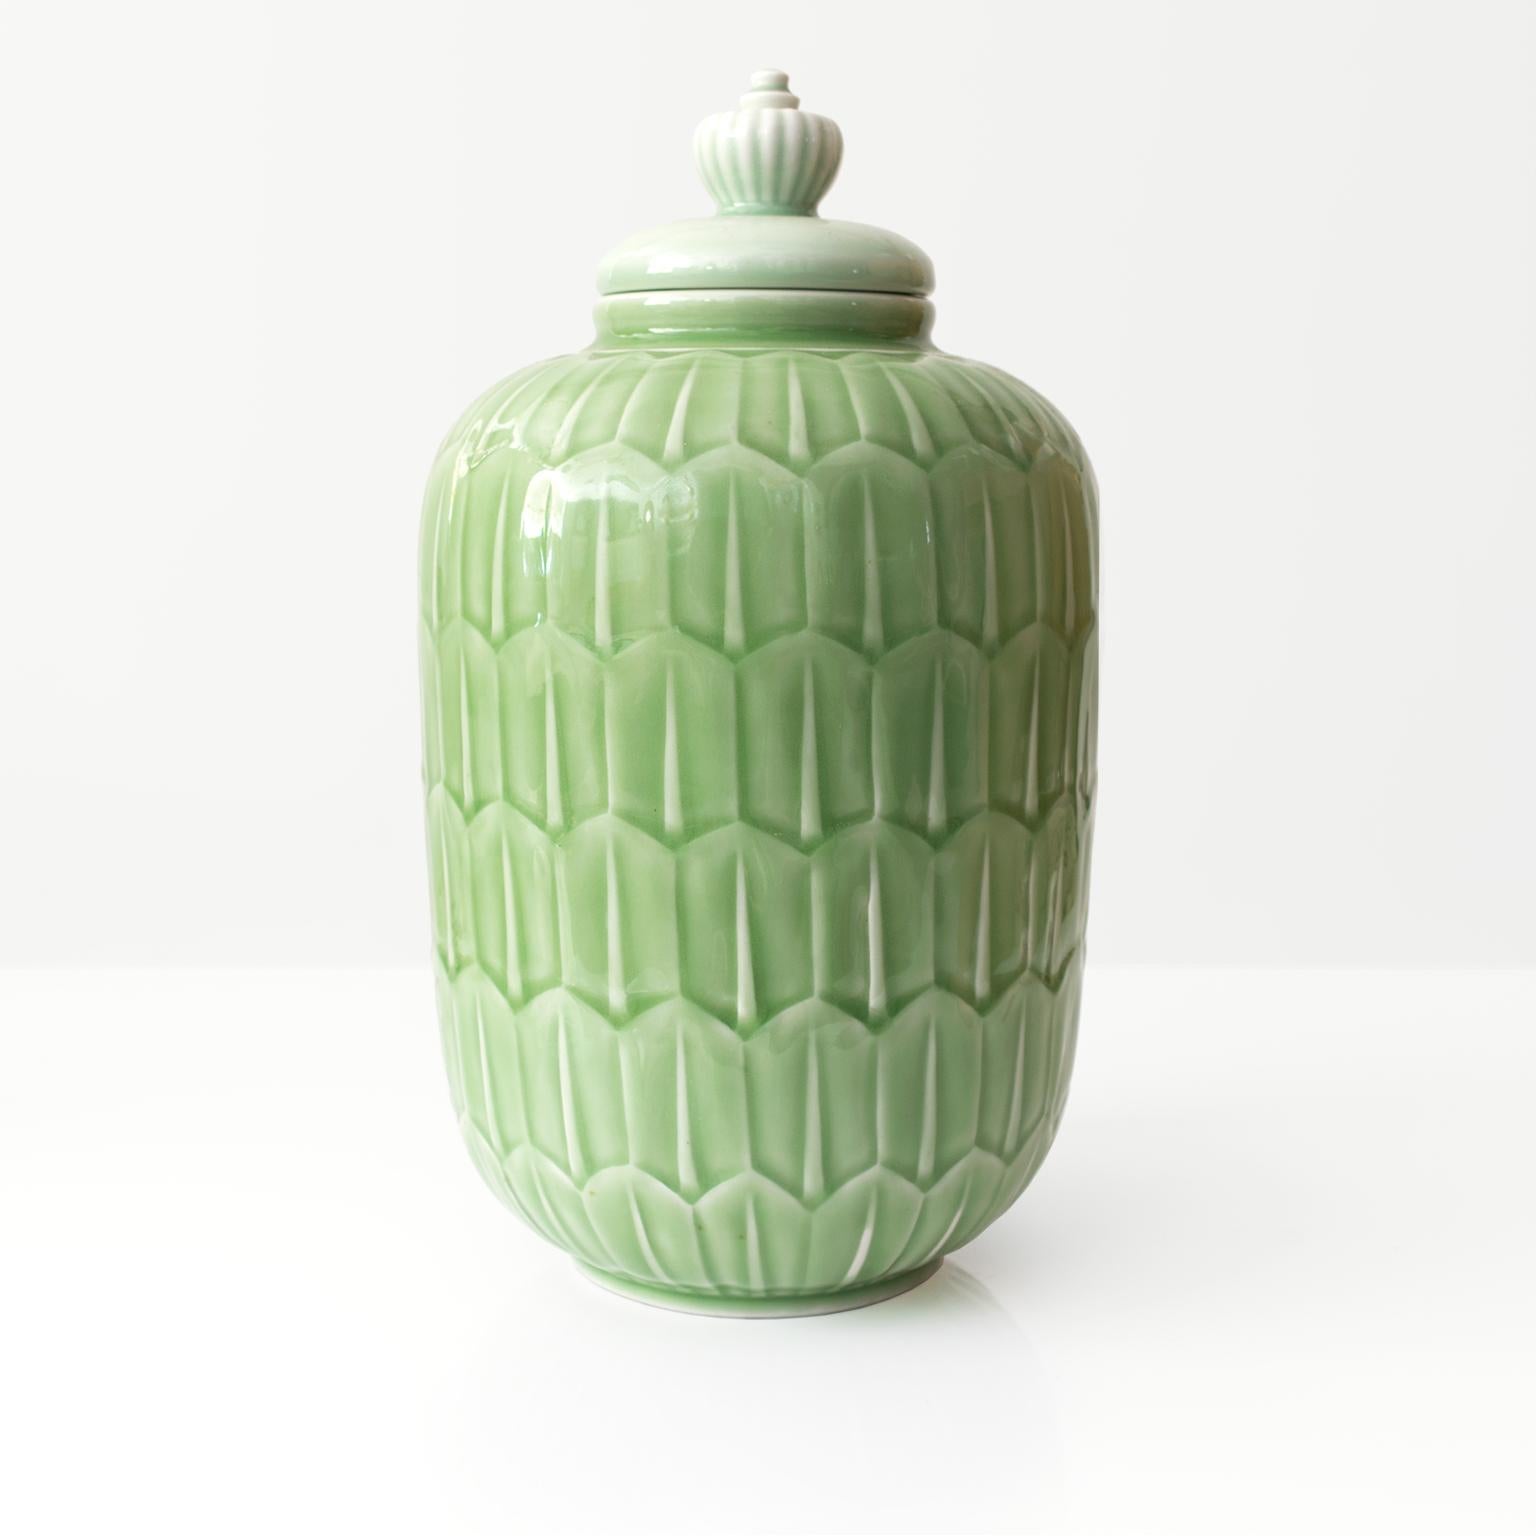 A large elegant Scandinavian Modern jaded colored glaze on a raised pattern ceramic jar with lid. Designed by Gunnar Nylund for Rörstrand, Sweden, circa 1940. 

Measures: Height 14.5